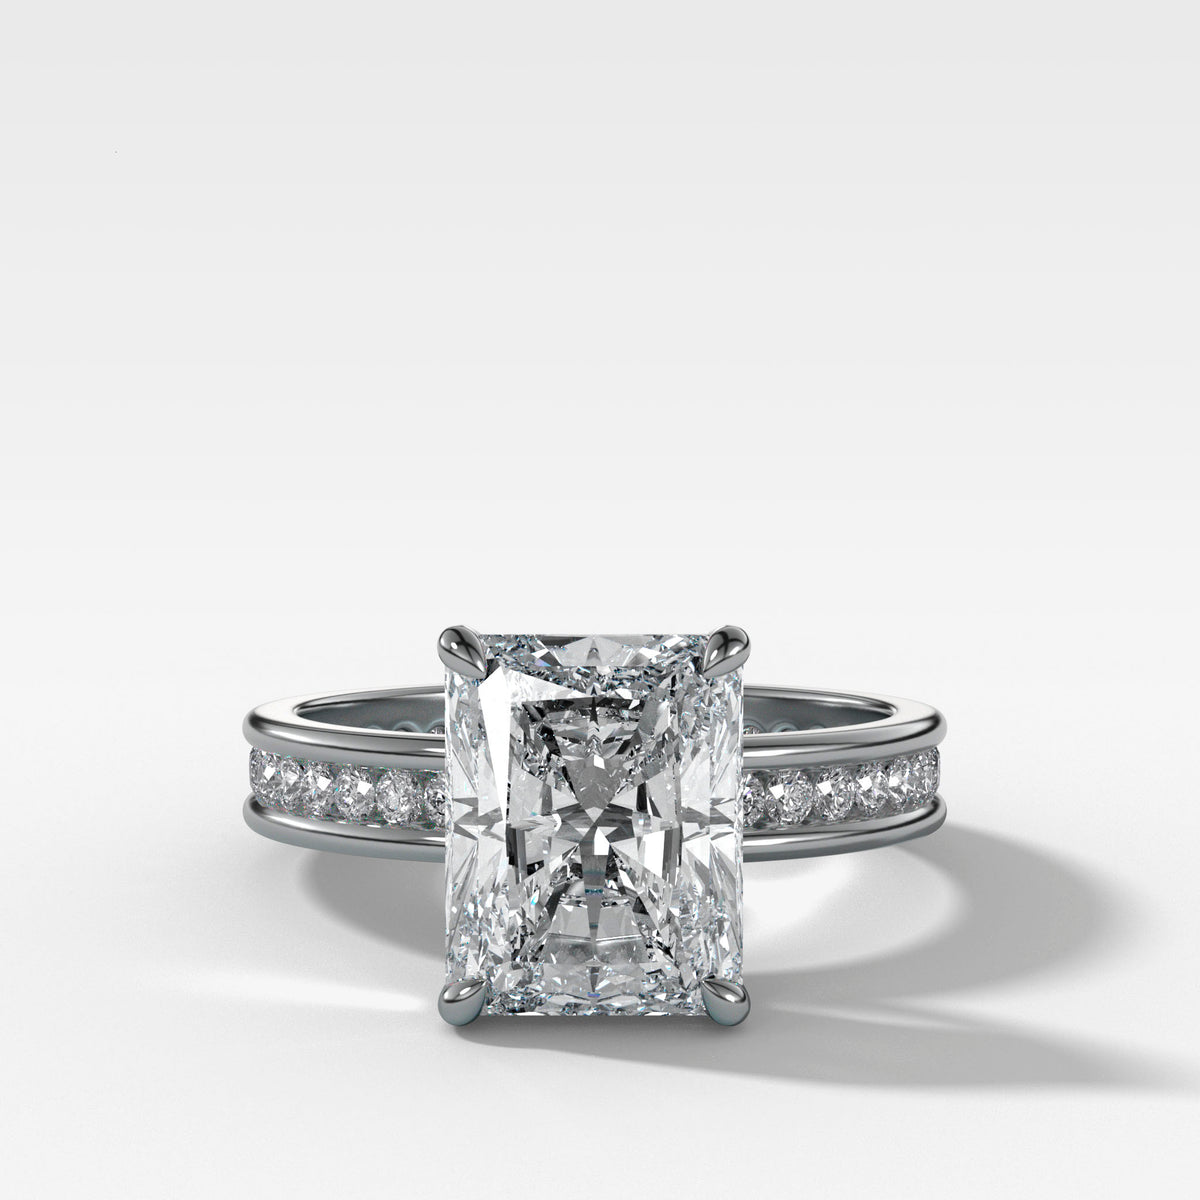 Petite Channel Set Engagement Ring with Elongated Radiant Cut Diamond